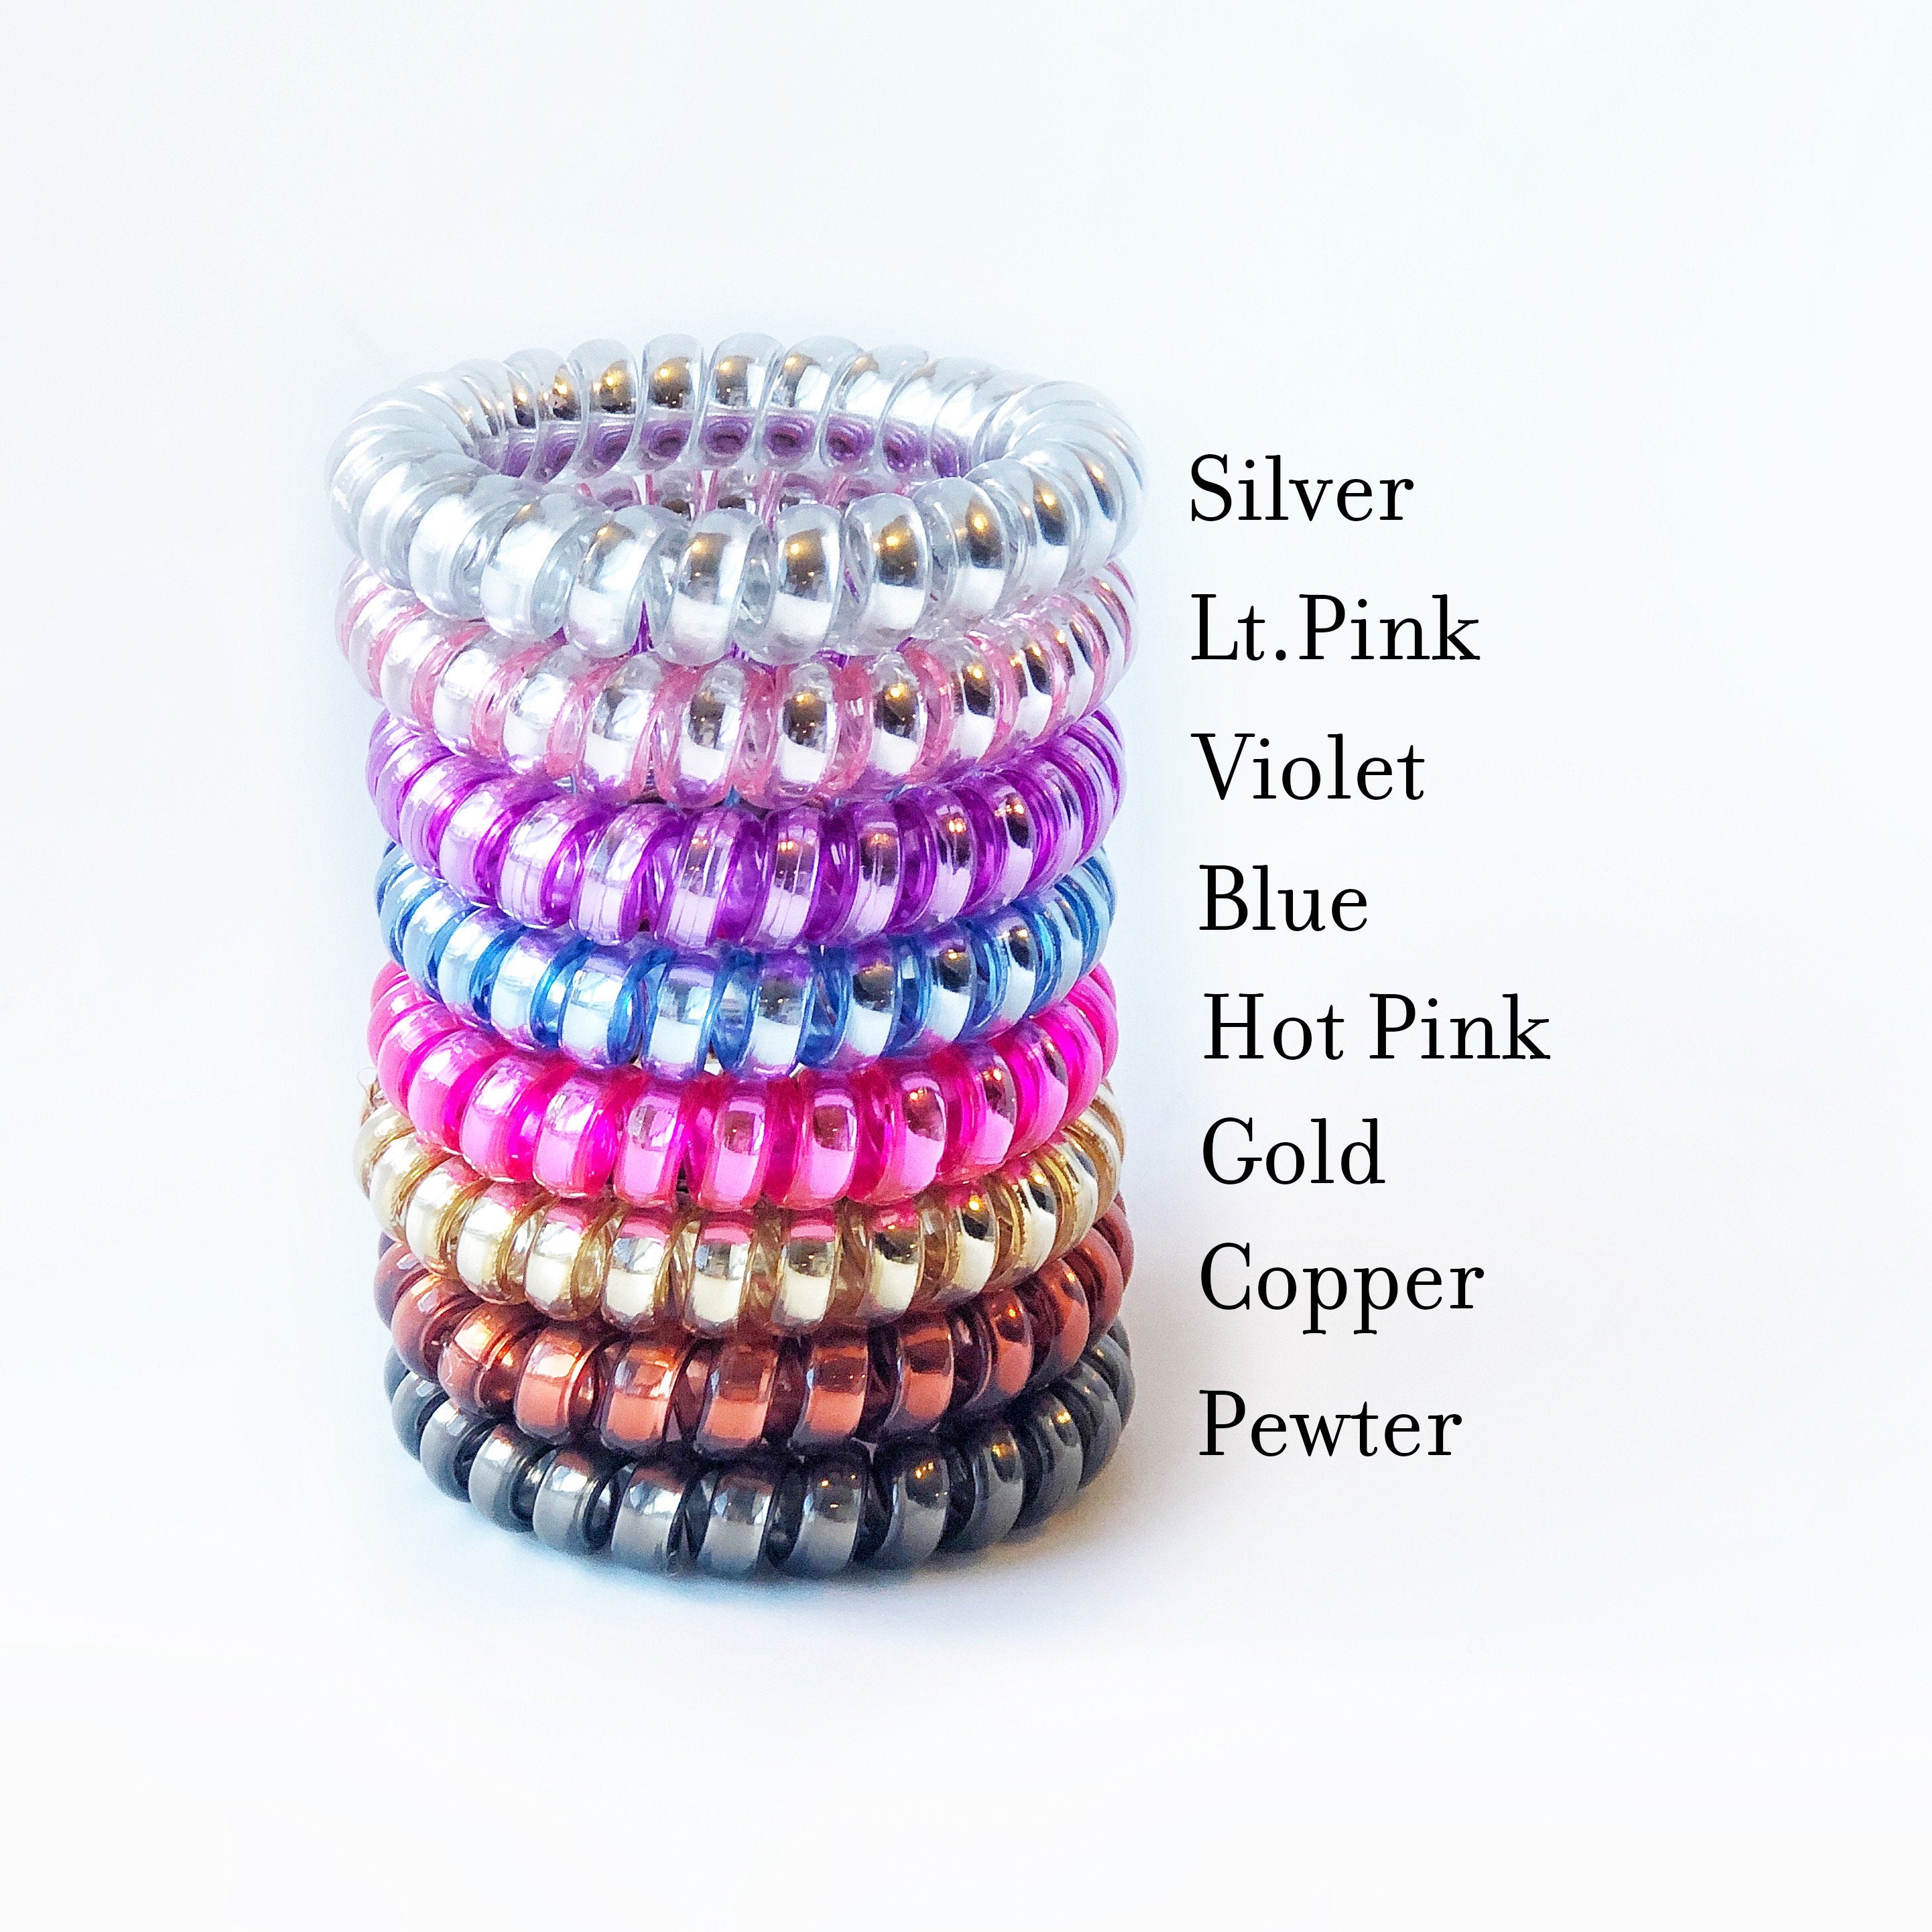 To Have and To Hold Your Hair Back Bachelorette Party Favors, Telephone Cord Spiral Hair Ties, Coil Hair Tie Bridal Shower Favors - @PlumPolkaDot 